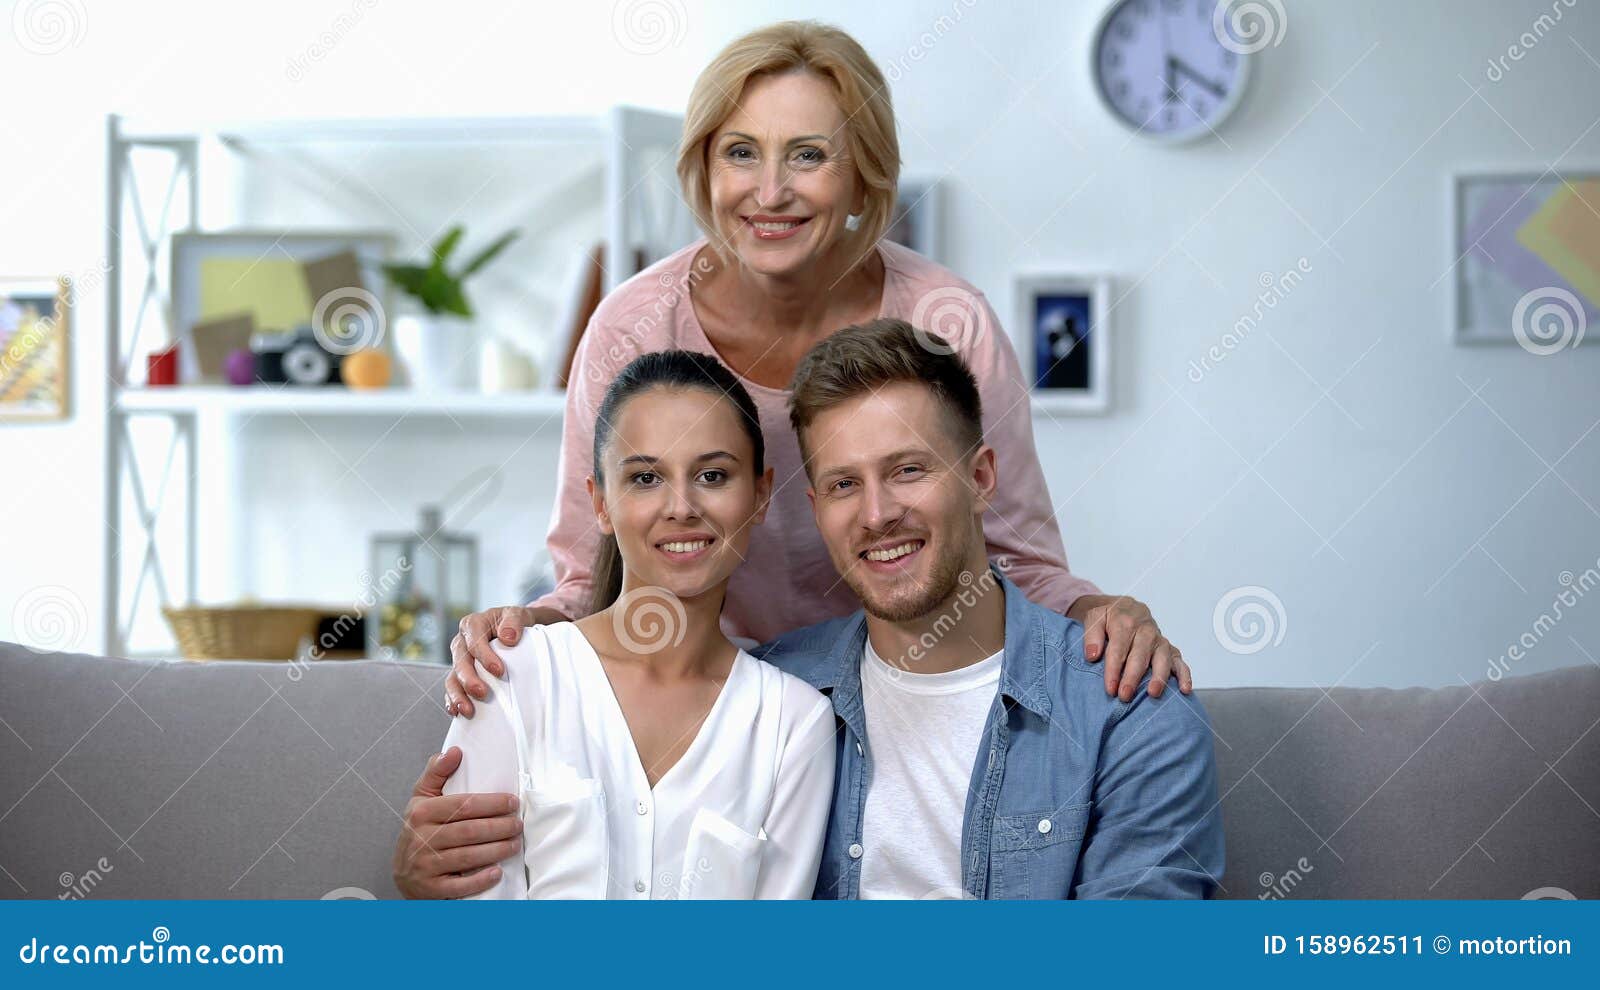 Mother-in-law Embracing Son and His Wife, Happy Family Relationship ... photo